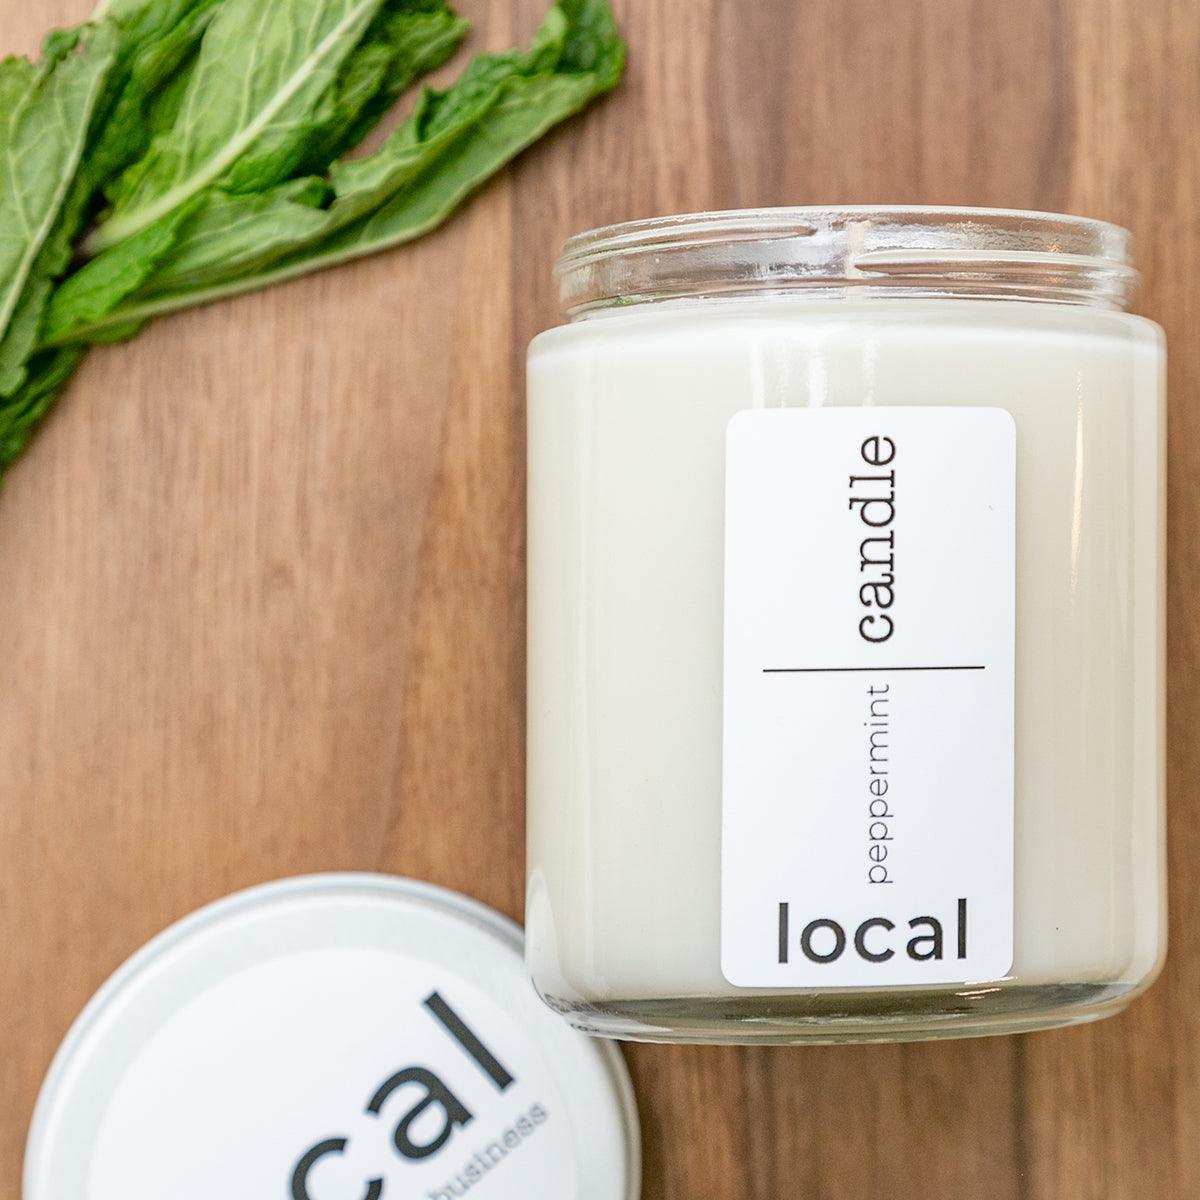 local candle - coffee peppermint vanilla - local - letsbelocal.ca